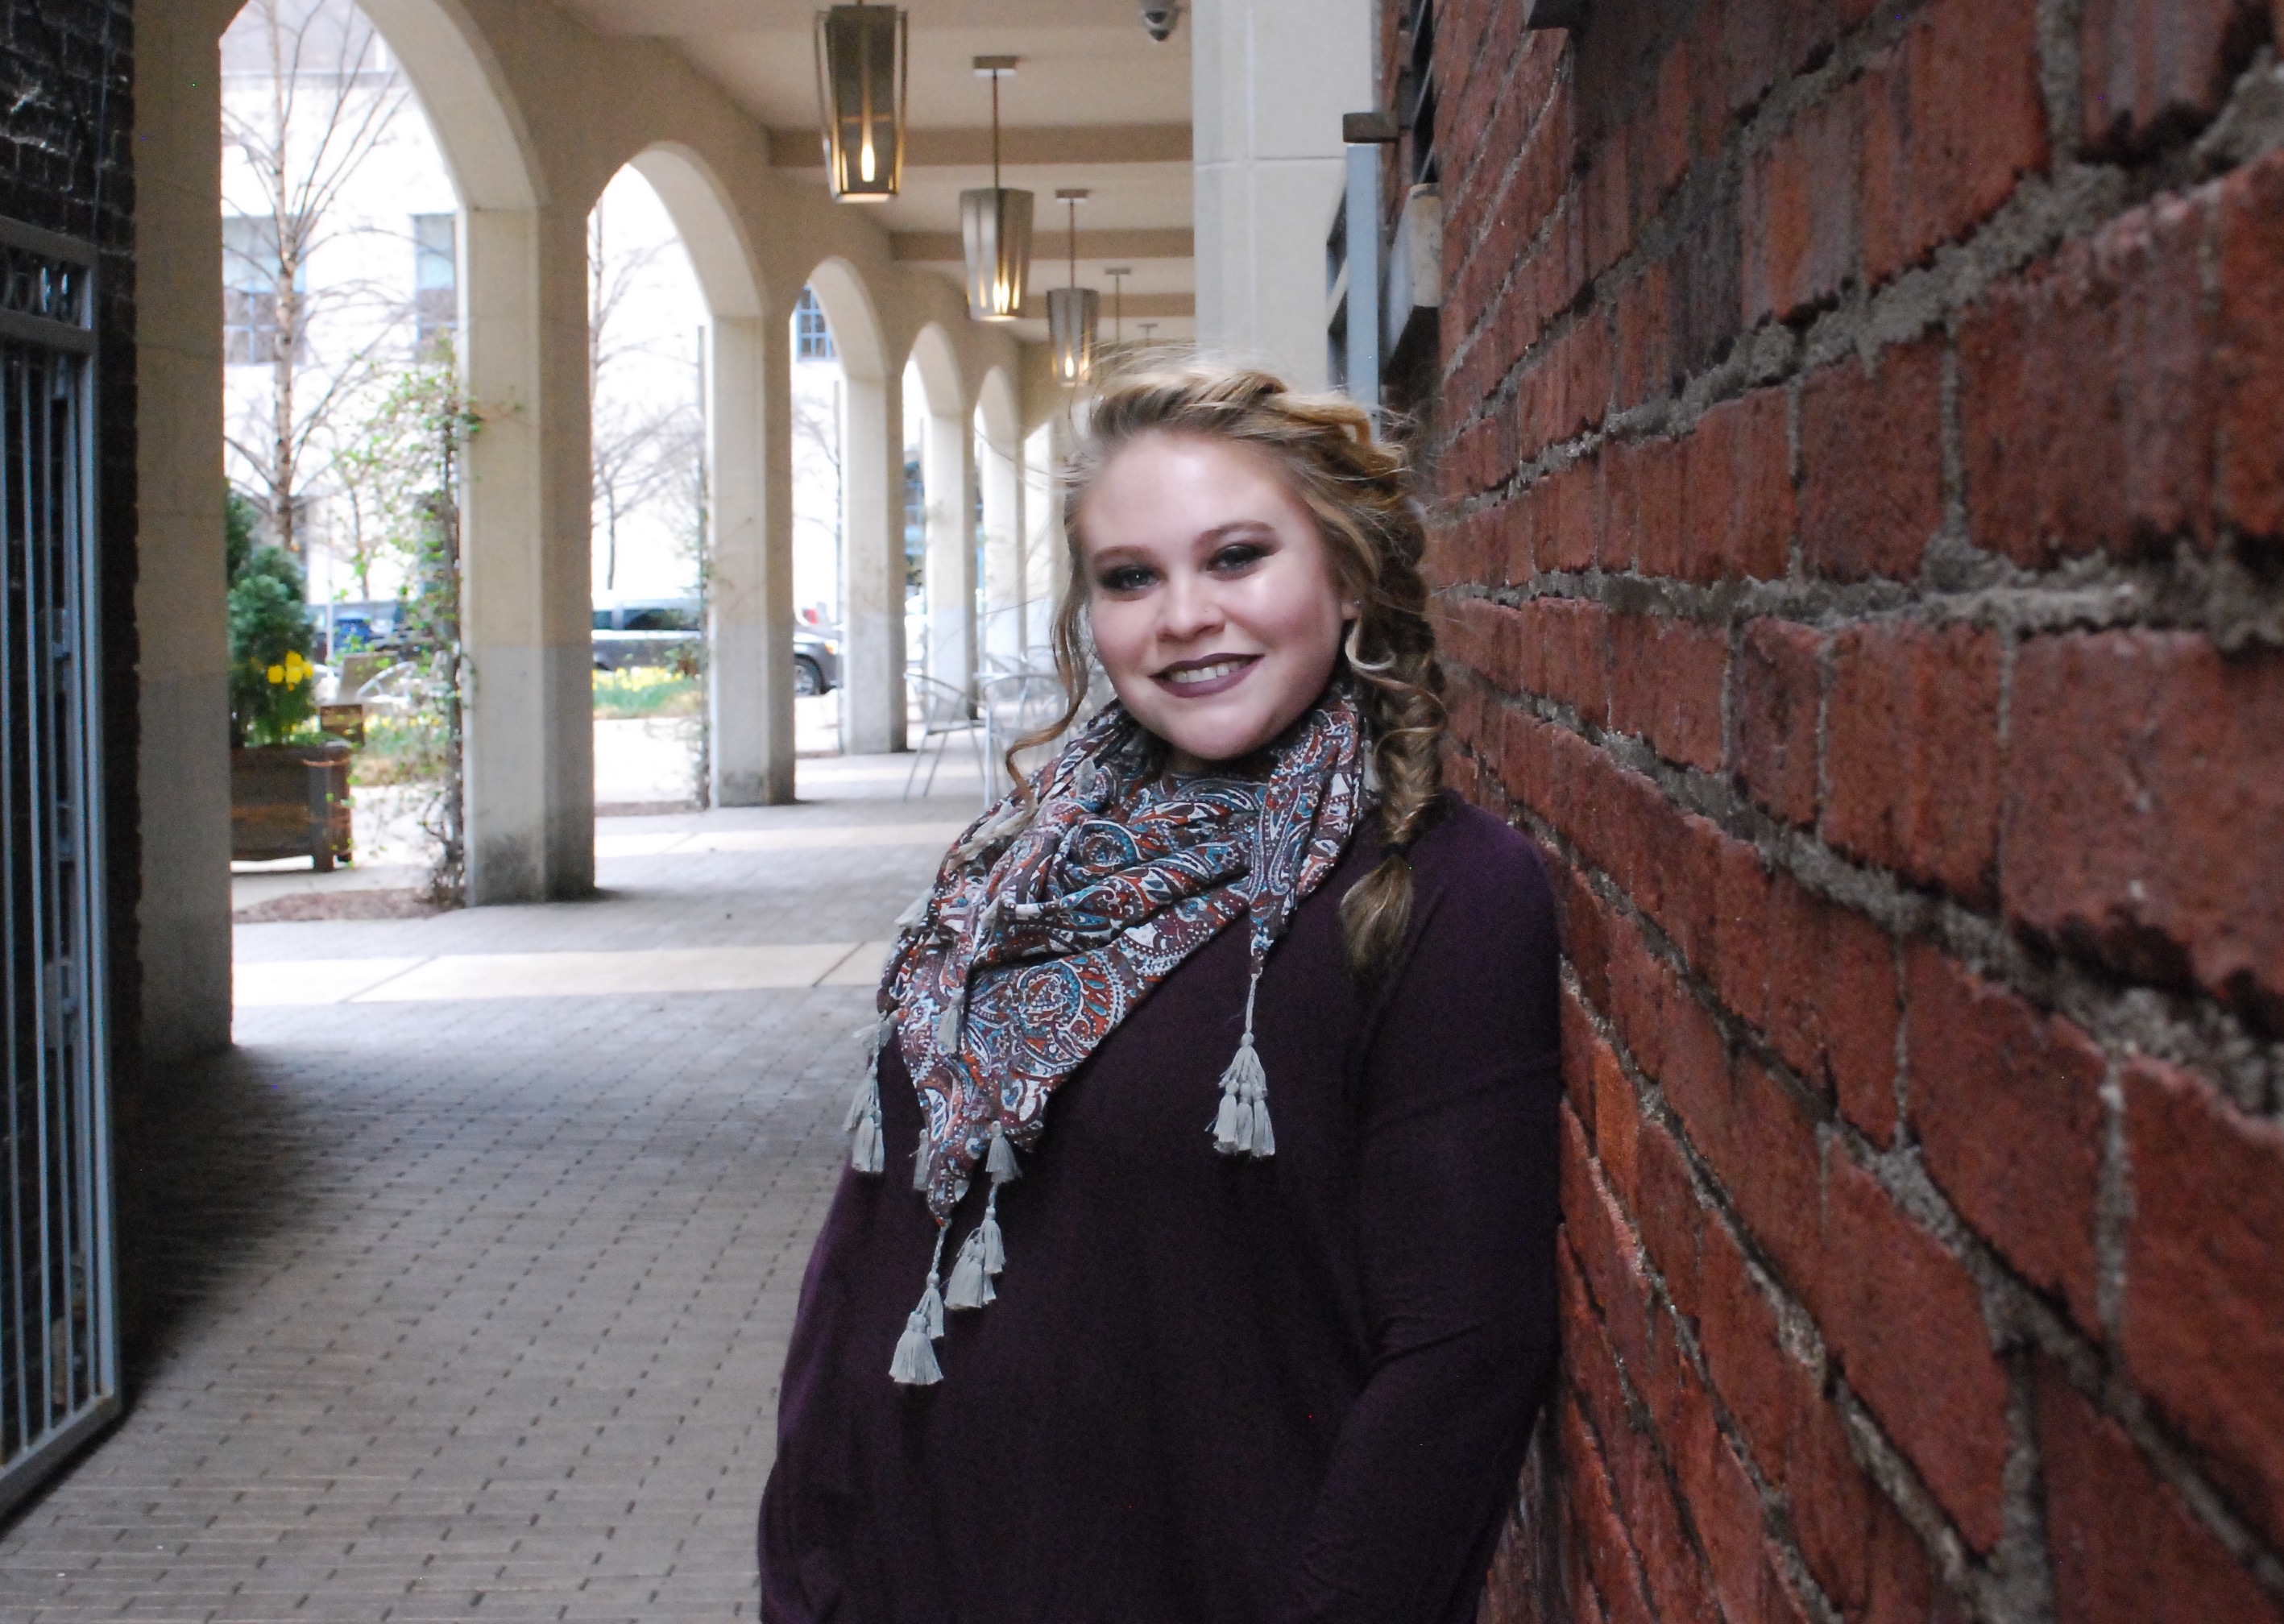 Pictured is Mary Moses, Creative Writing Major